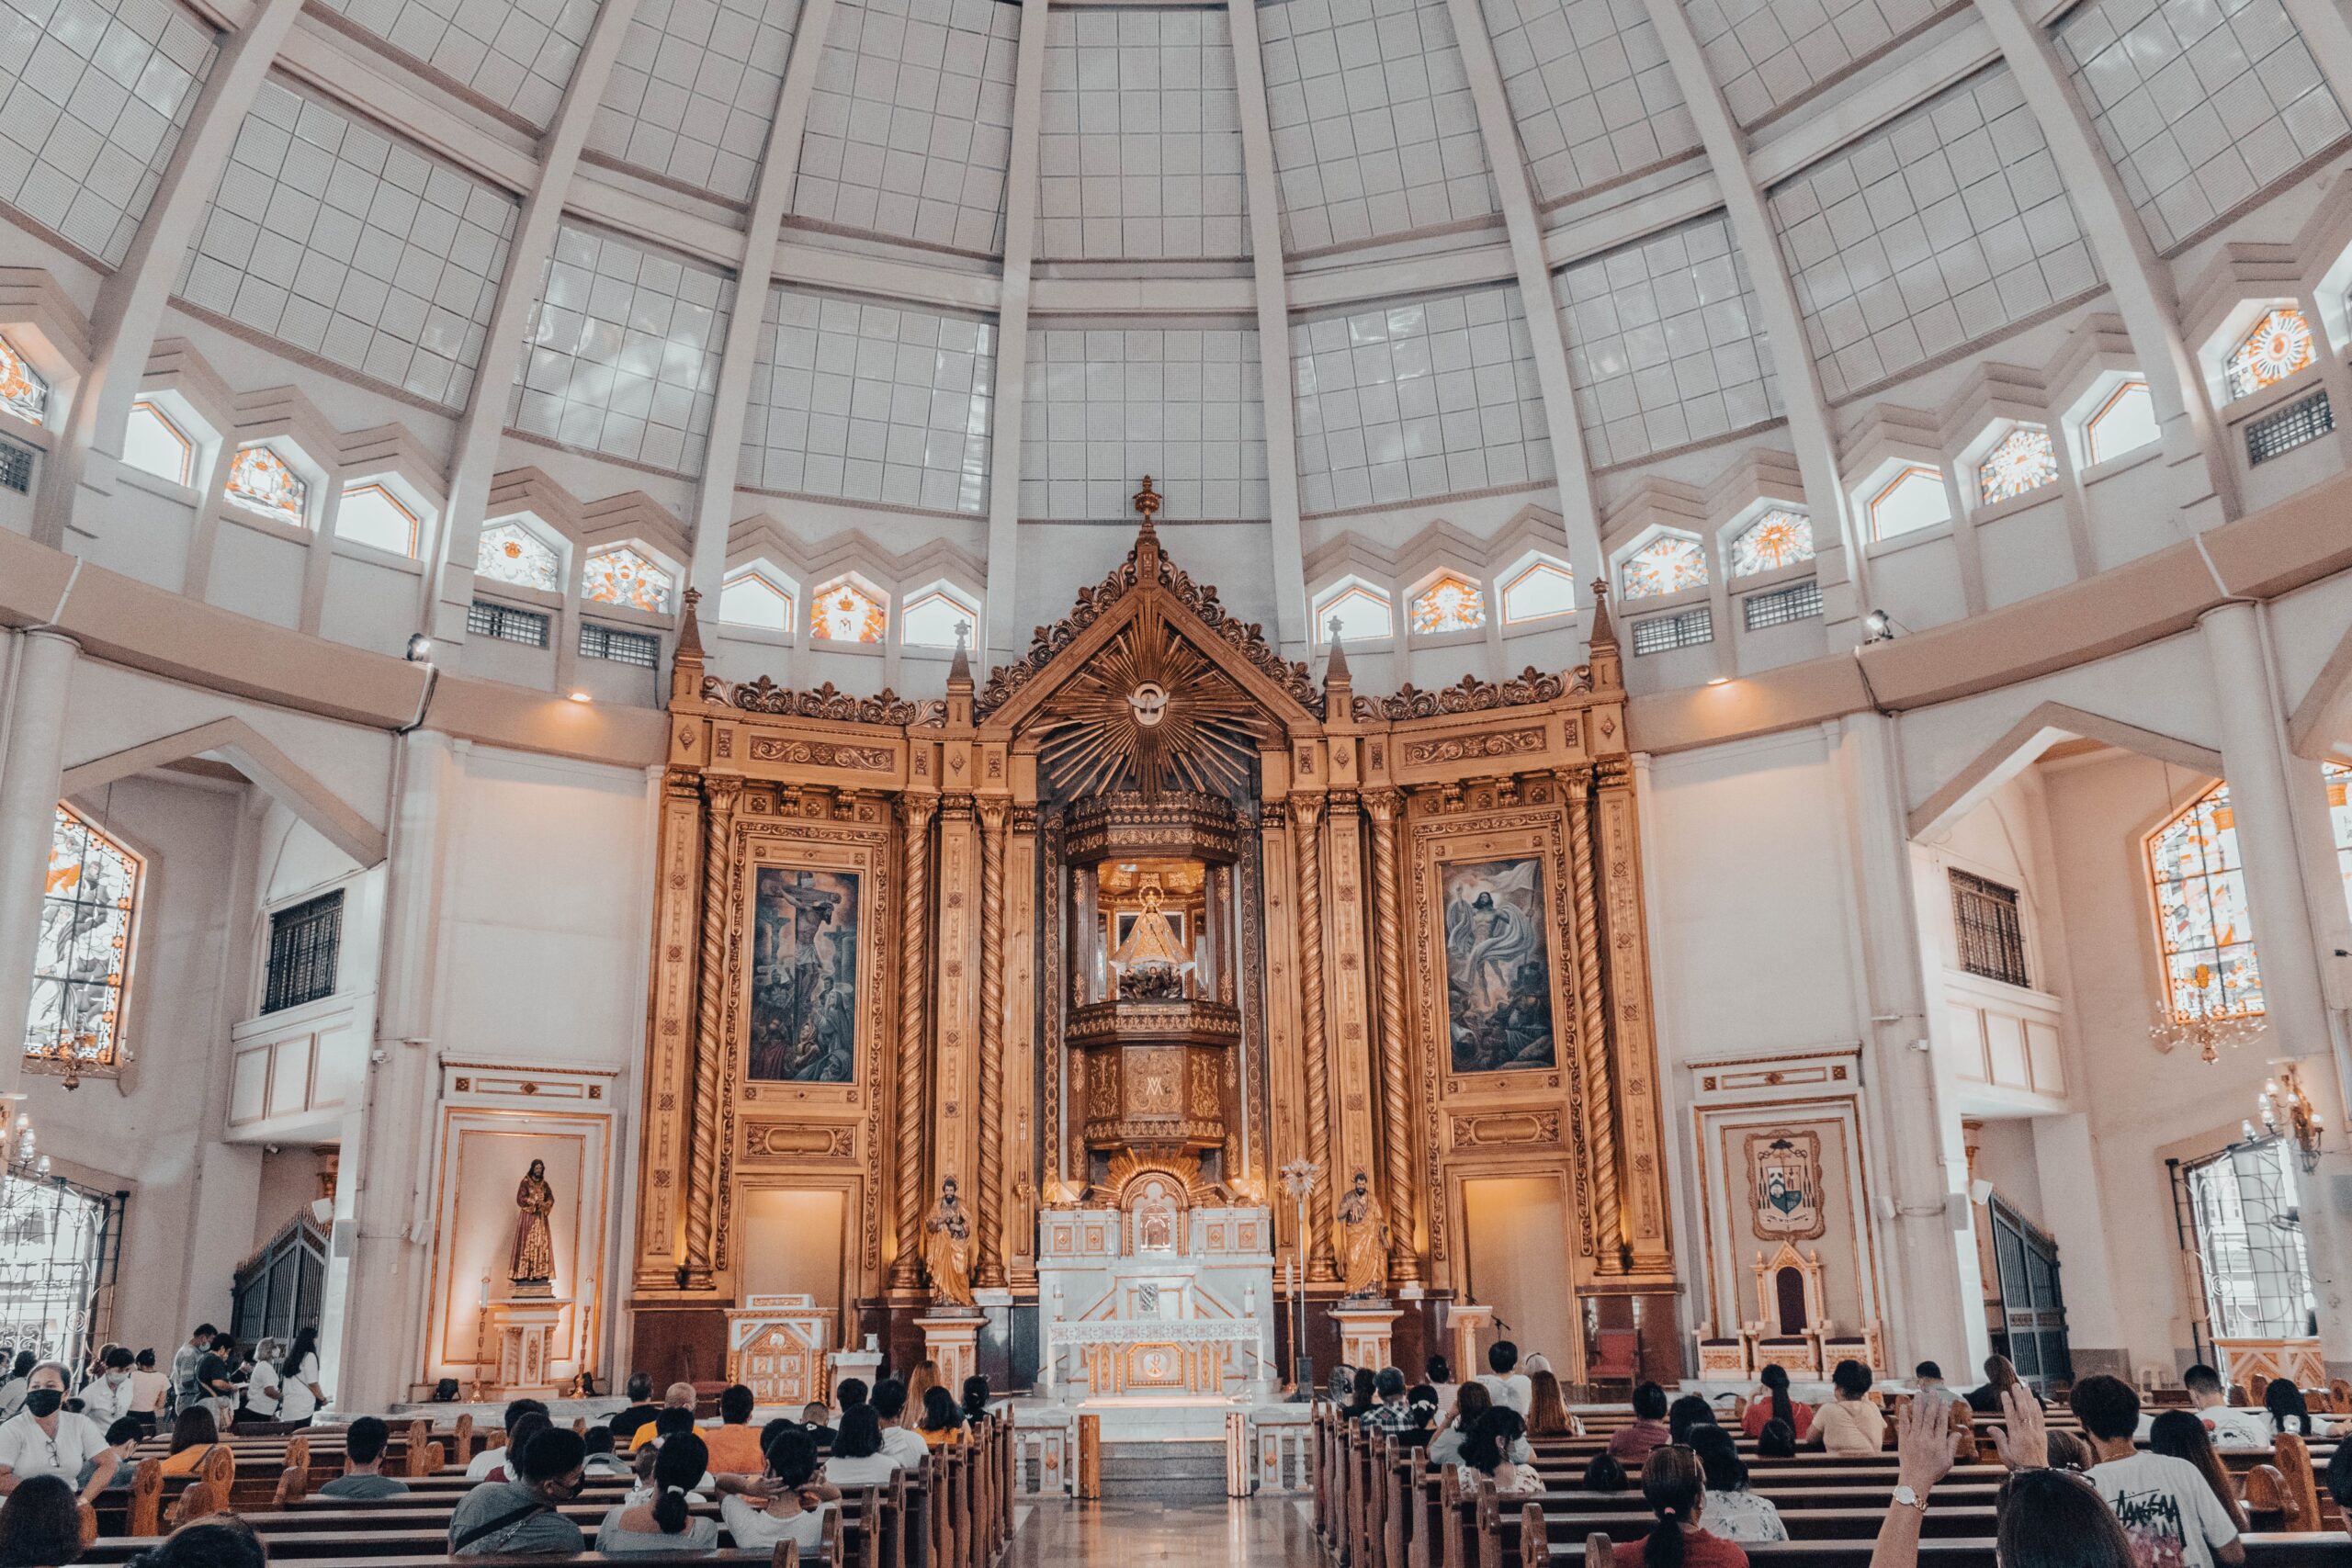 “Do you hate being Filipino?” — Reflections on ‘Identity in Christ’ Rhetoric and its Material Consequences on Christian Belonging